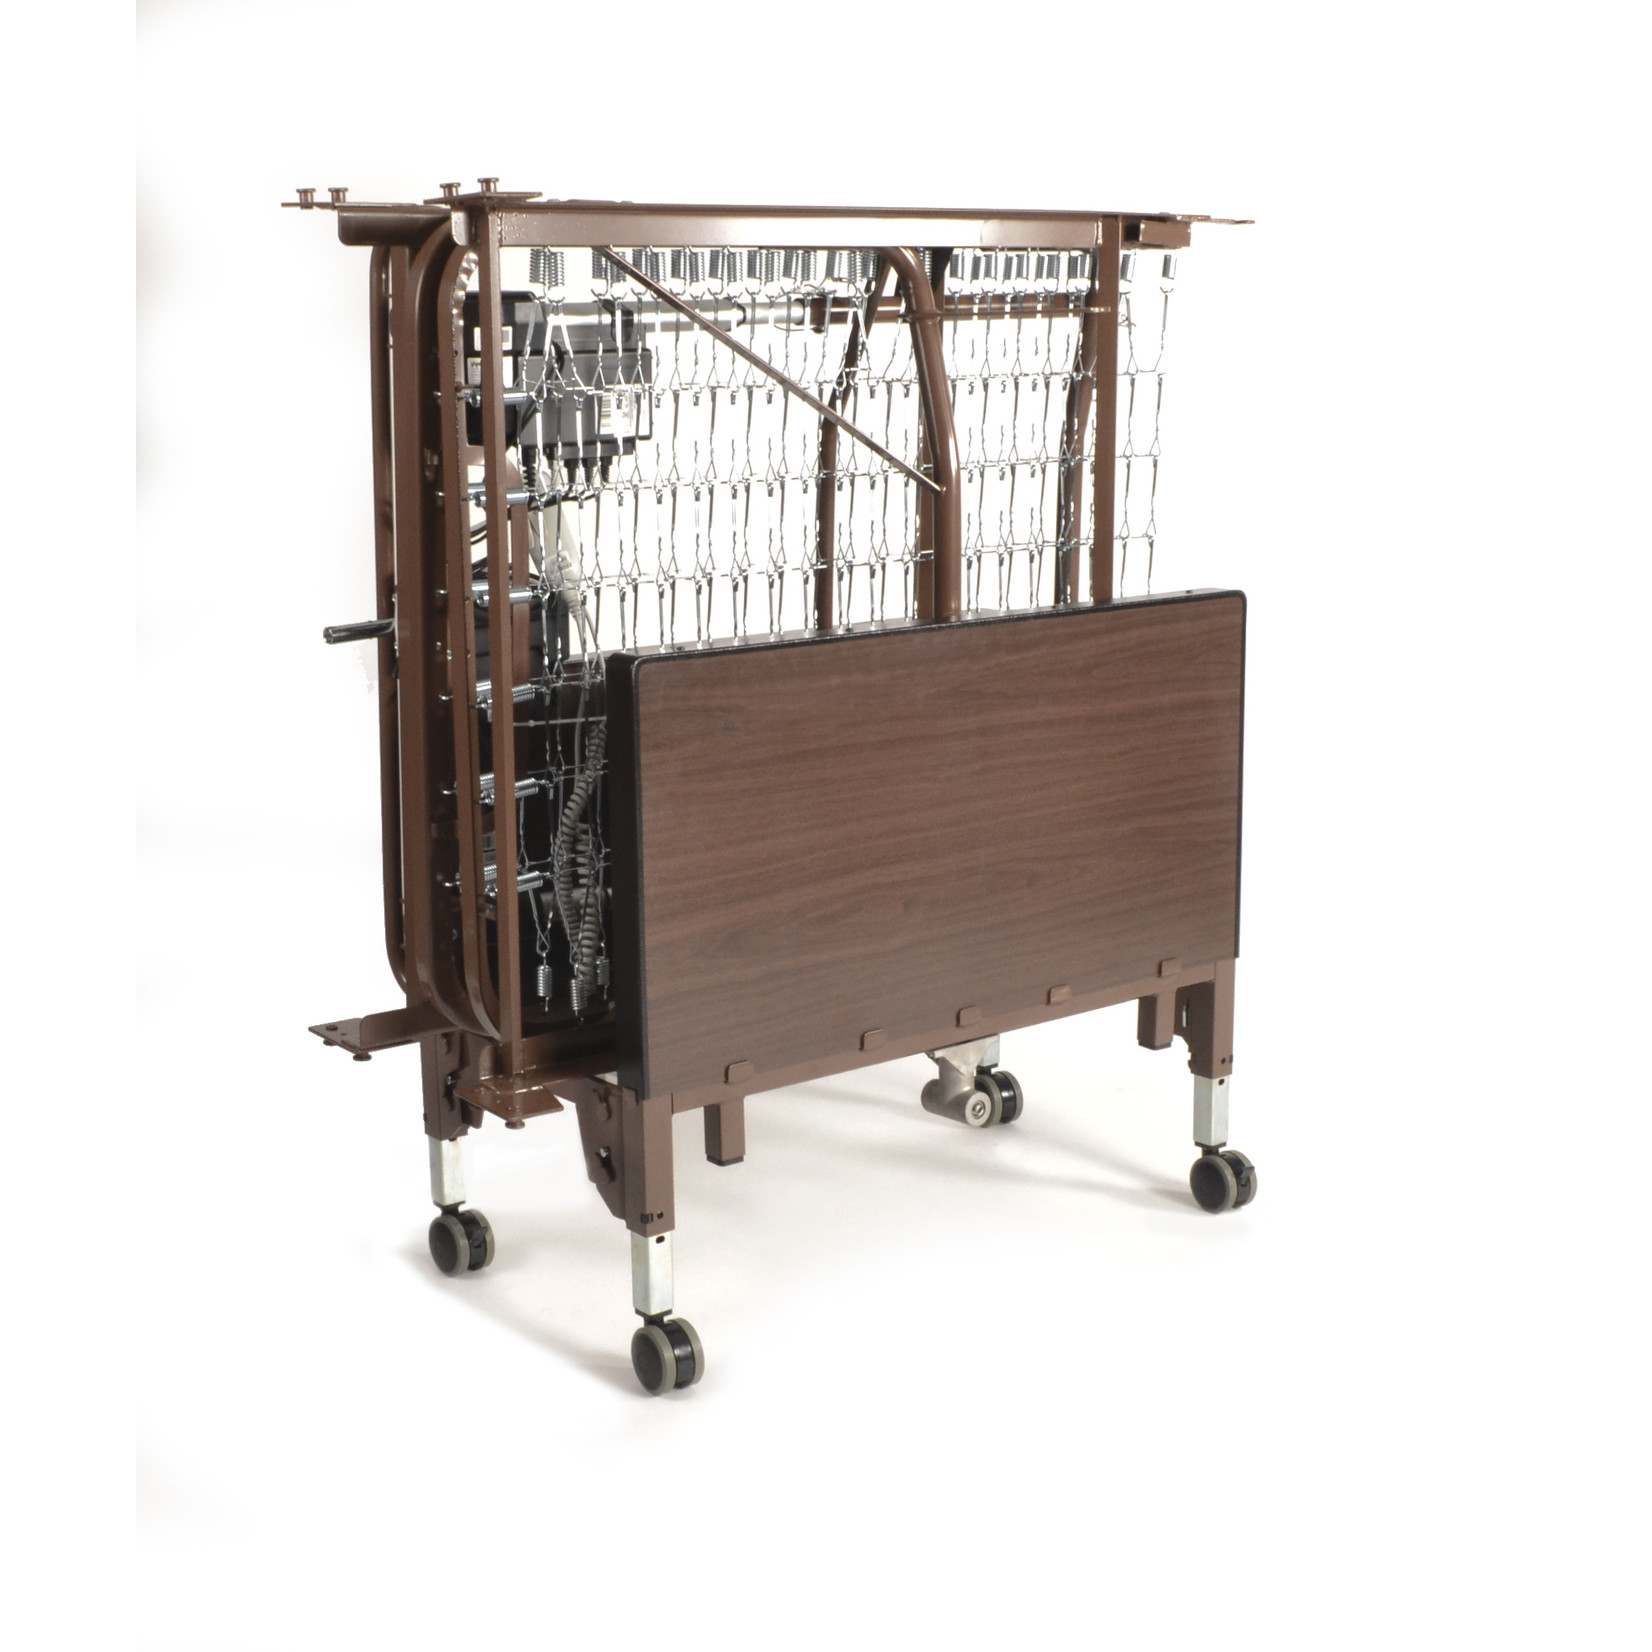 ProBasics Bed Cart for 36" wide Homecare Beds